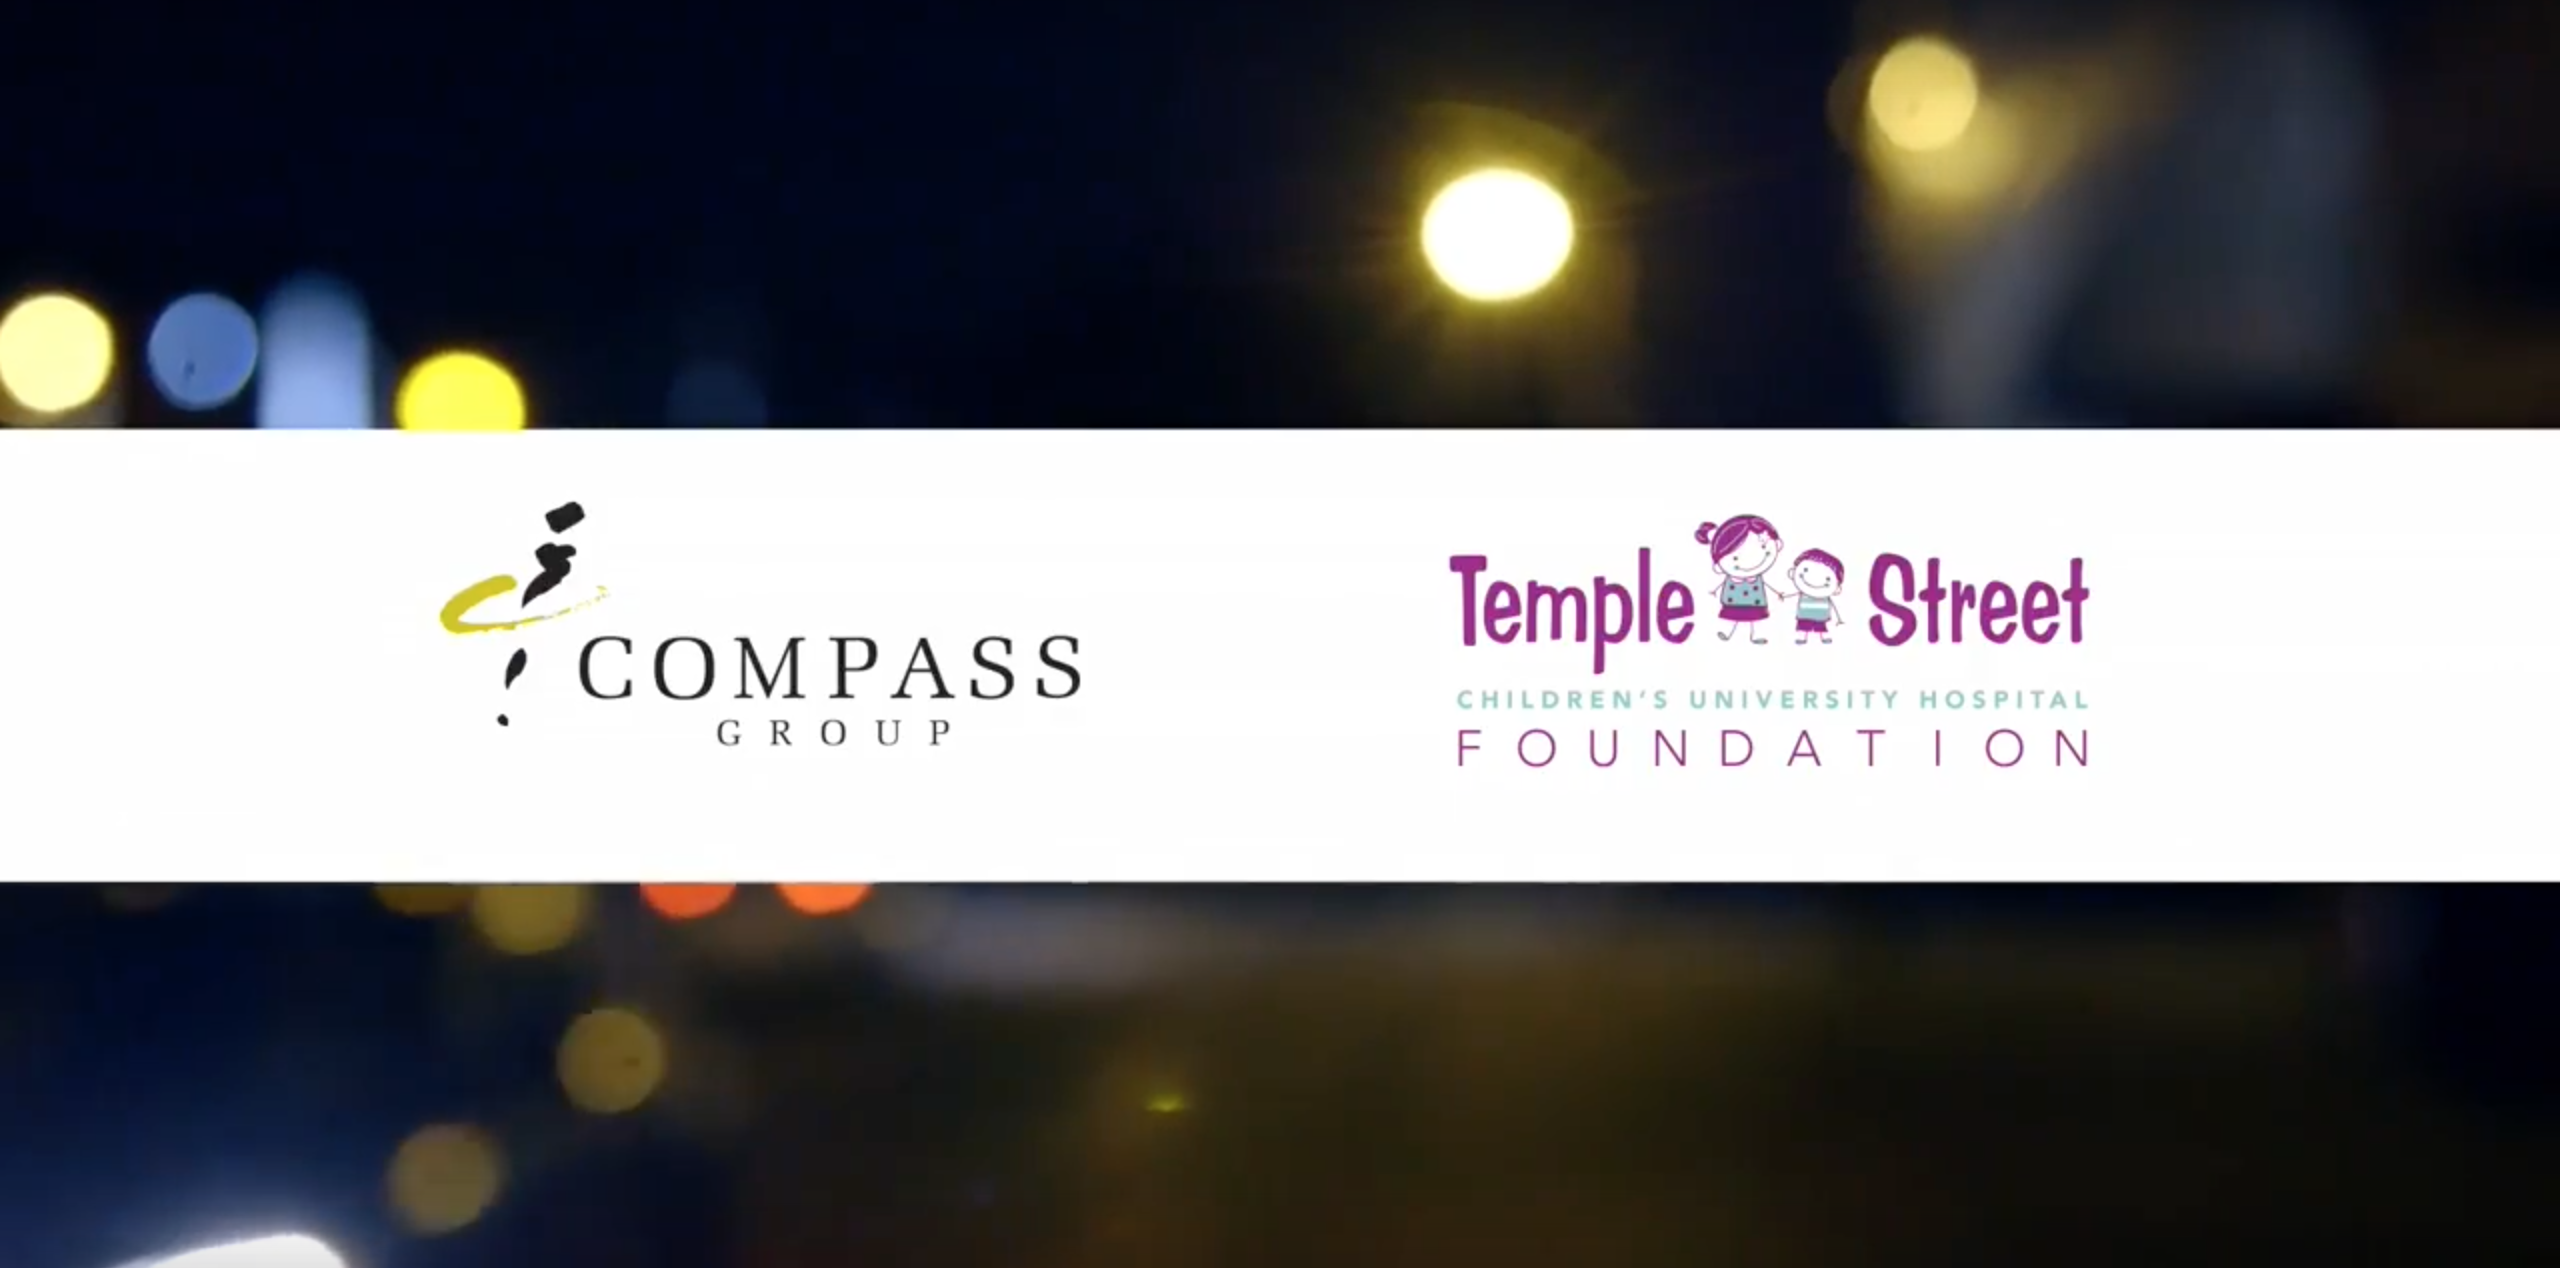 Compass Ireland and Temple Street Foundation